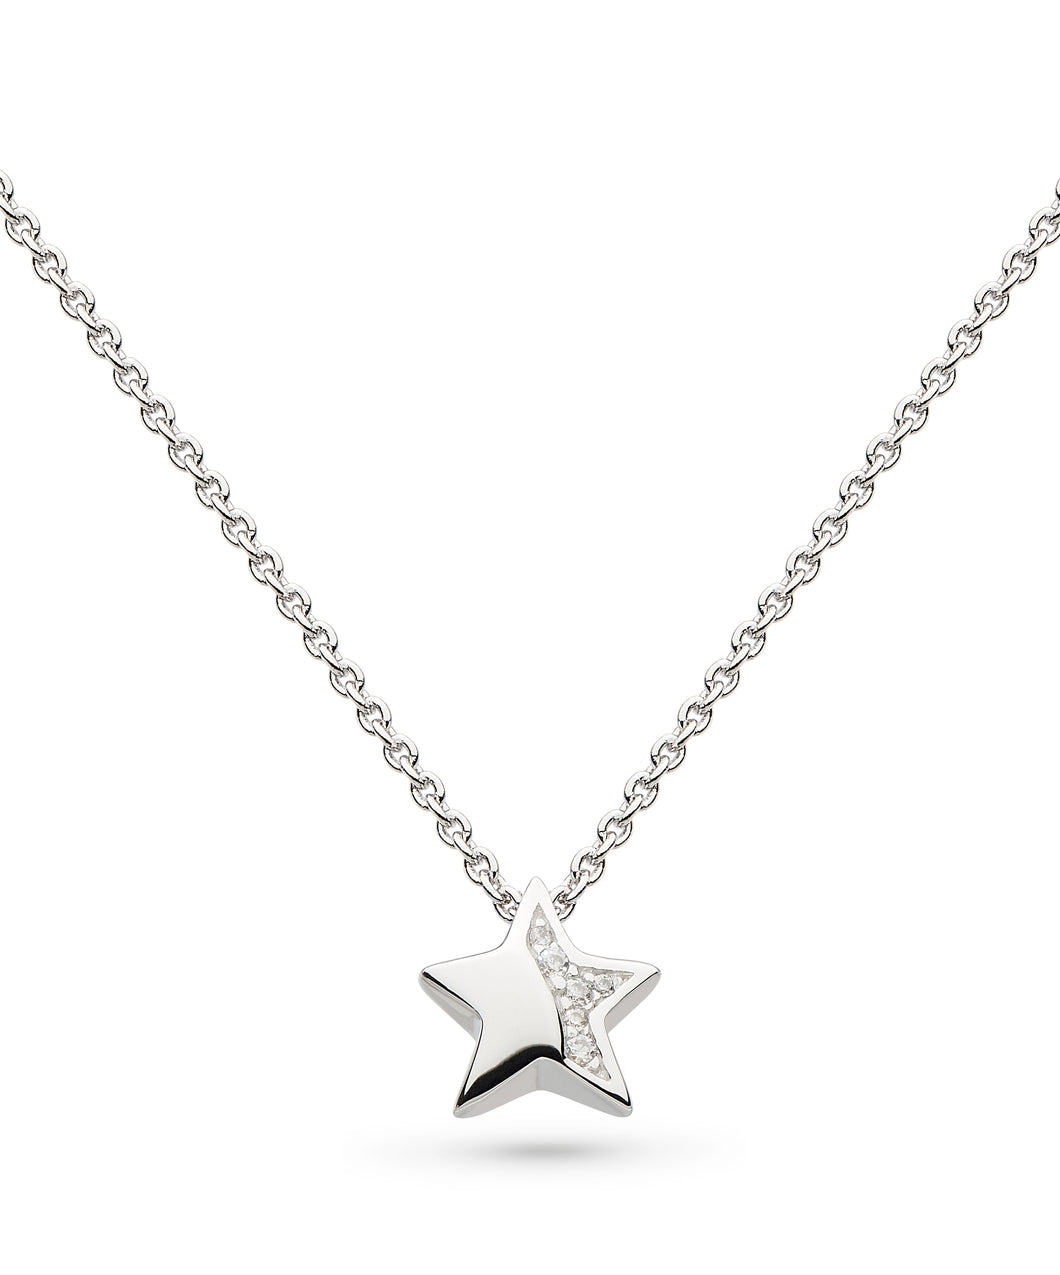 Sparkle Shining Star Necklace - Cockrams Jewellers